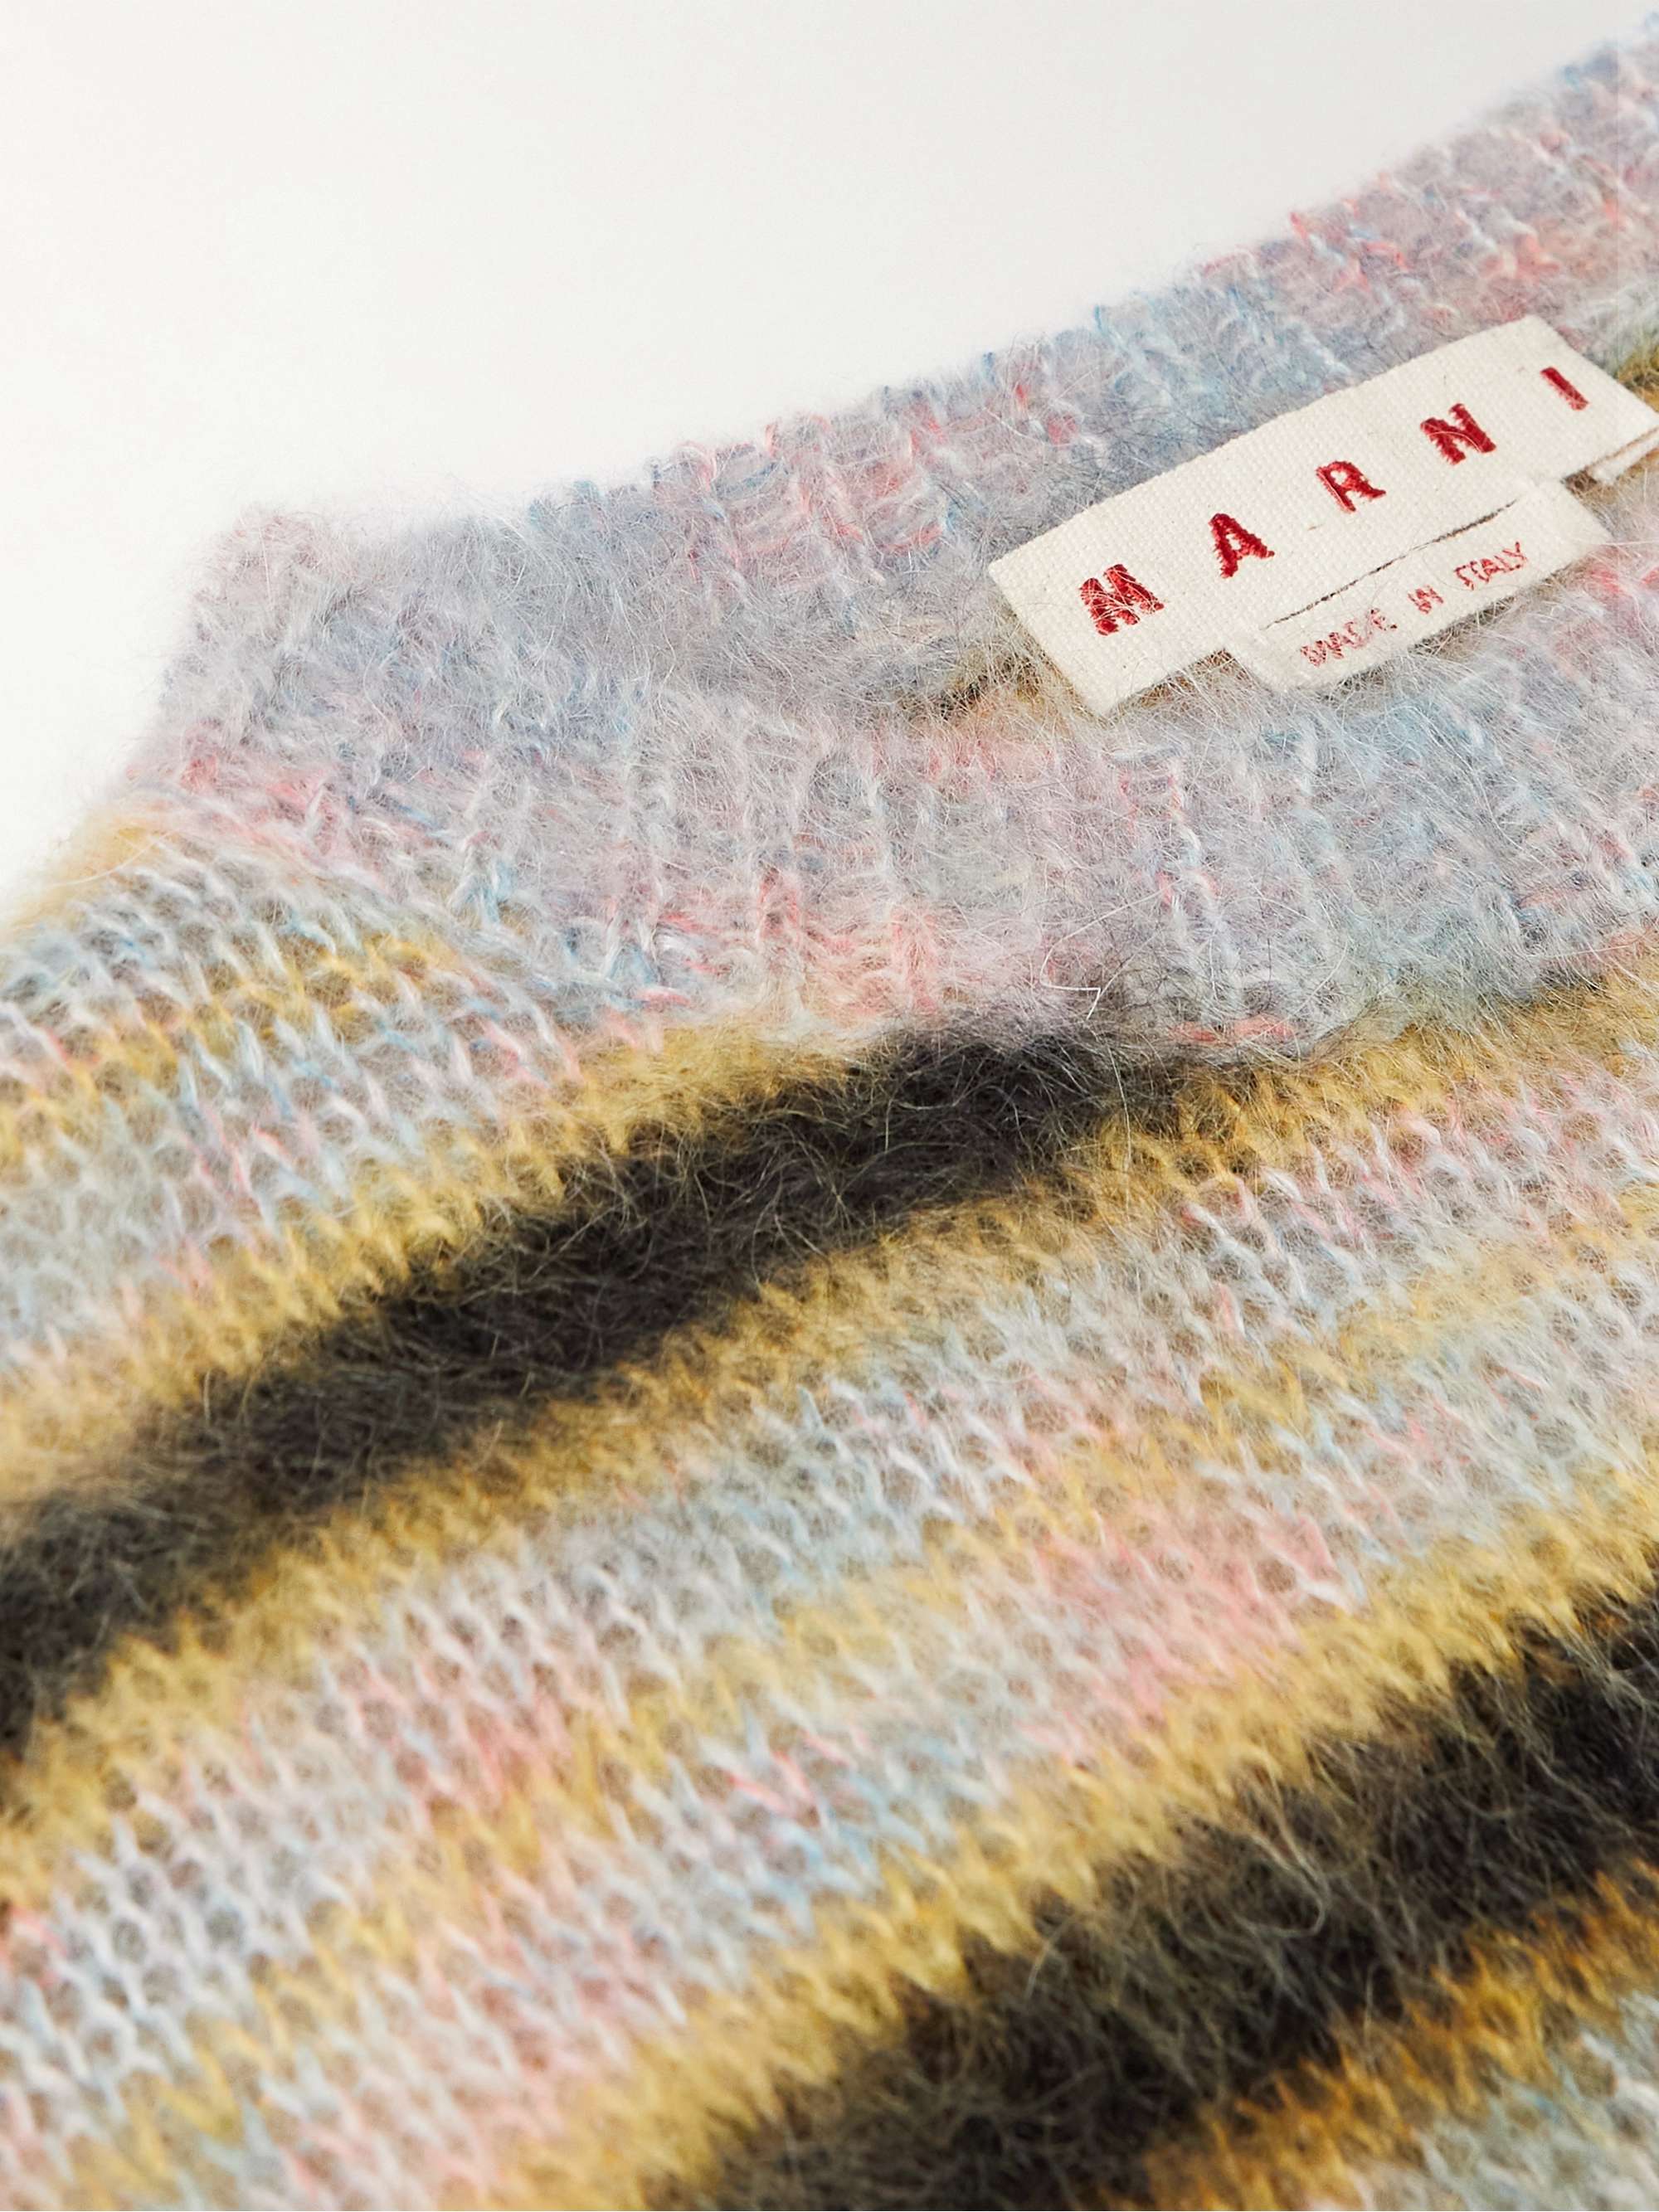 MARNI Striped Mohair-Blend Sweater